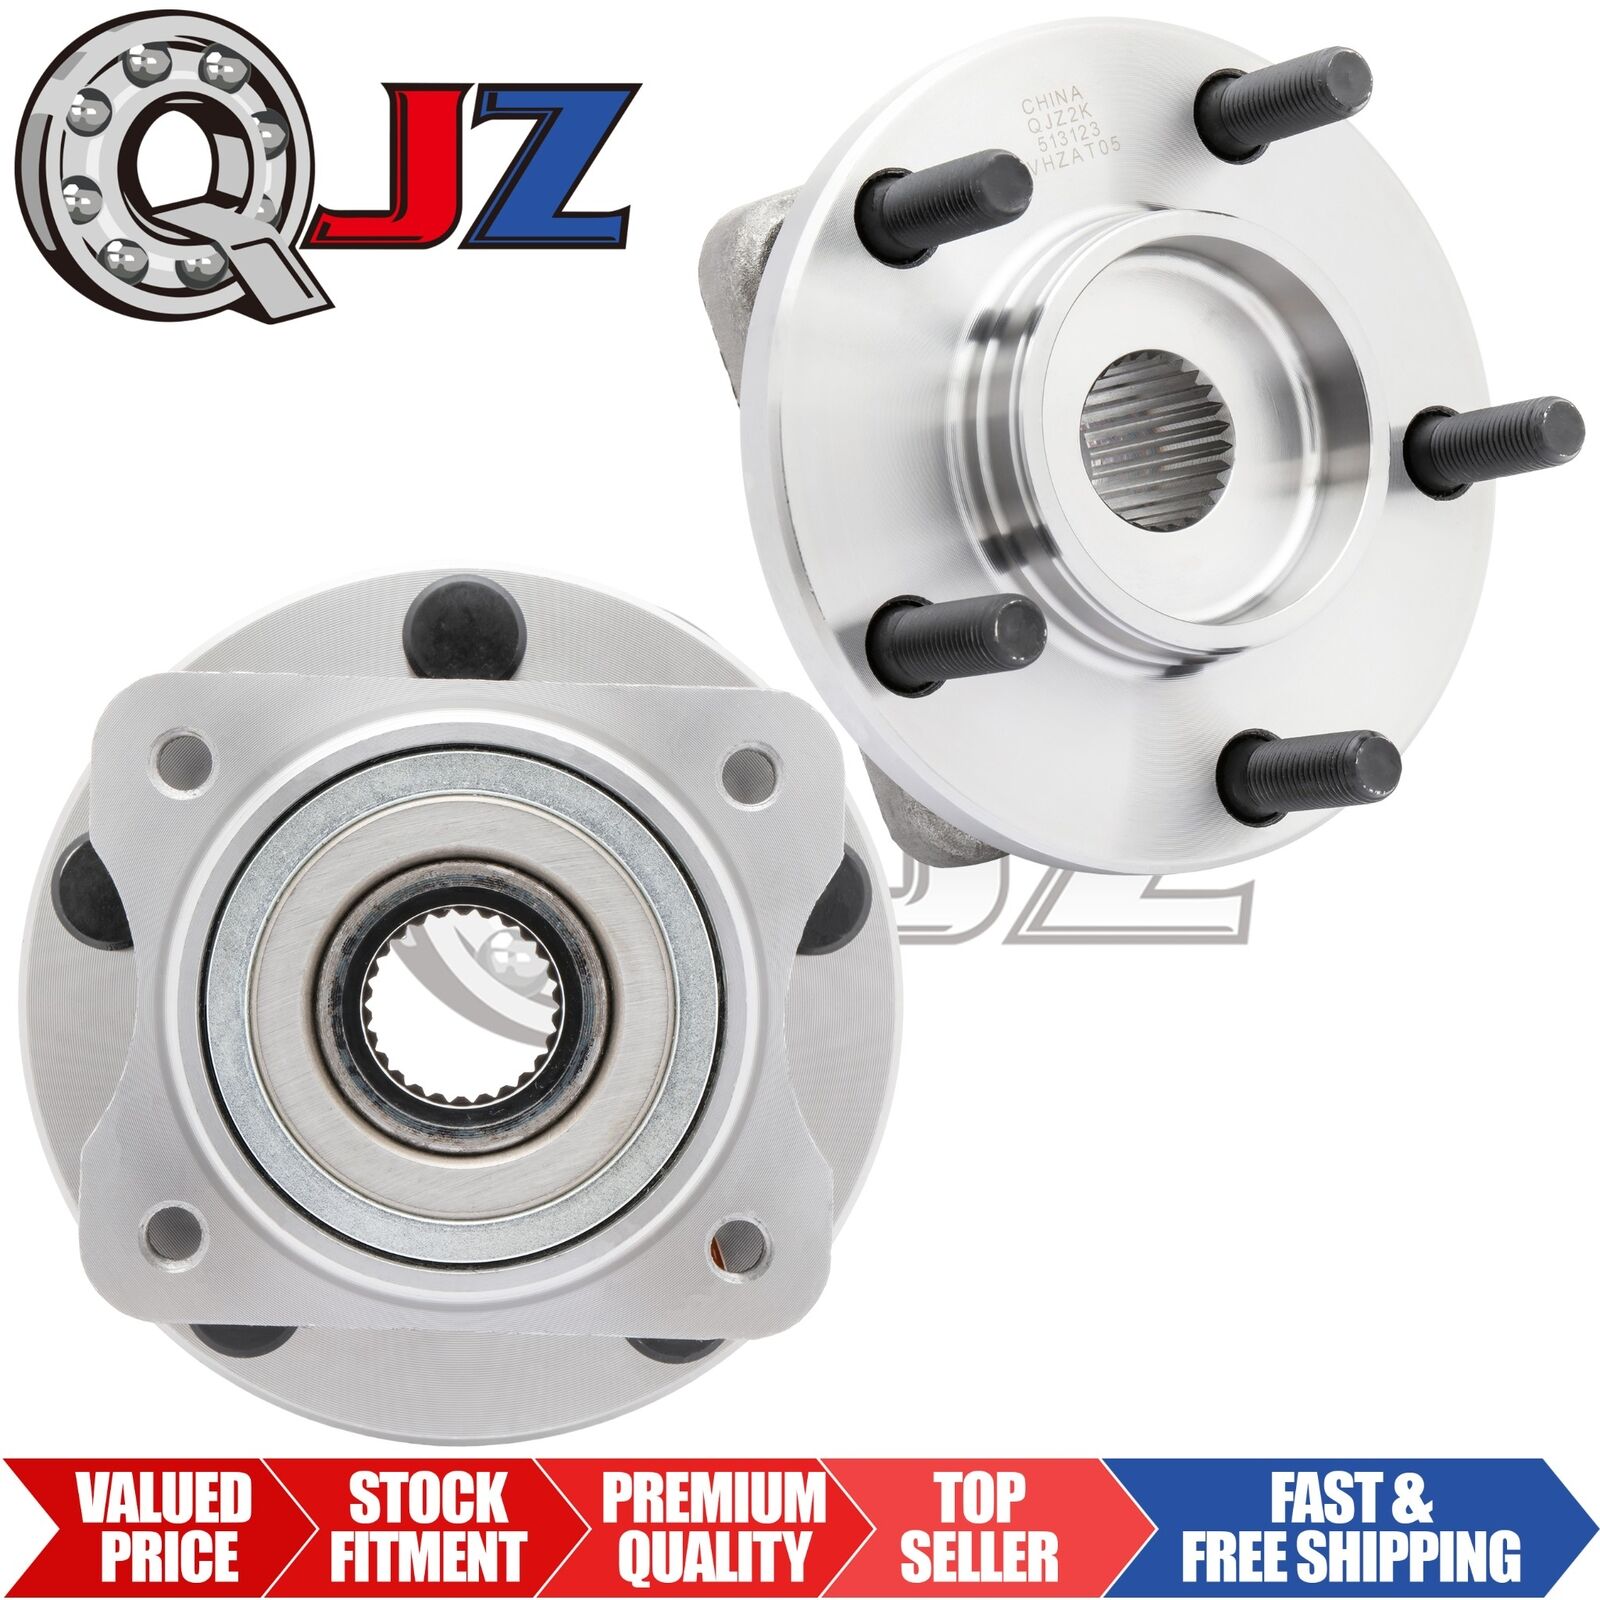 [FRONT(Qty.2)] Wheel Hub Assembly For 2000 Chrysler Grand Voyager FWD/AWD-Model